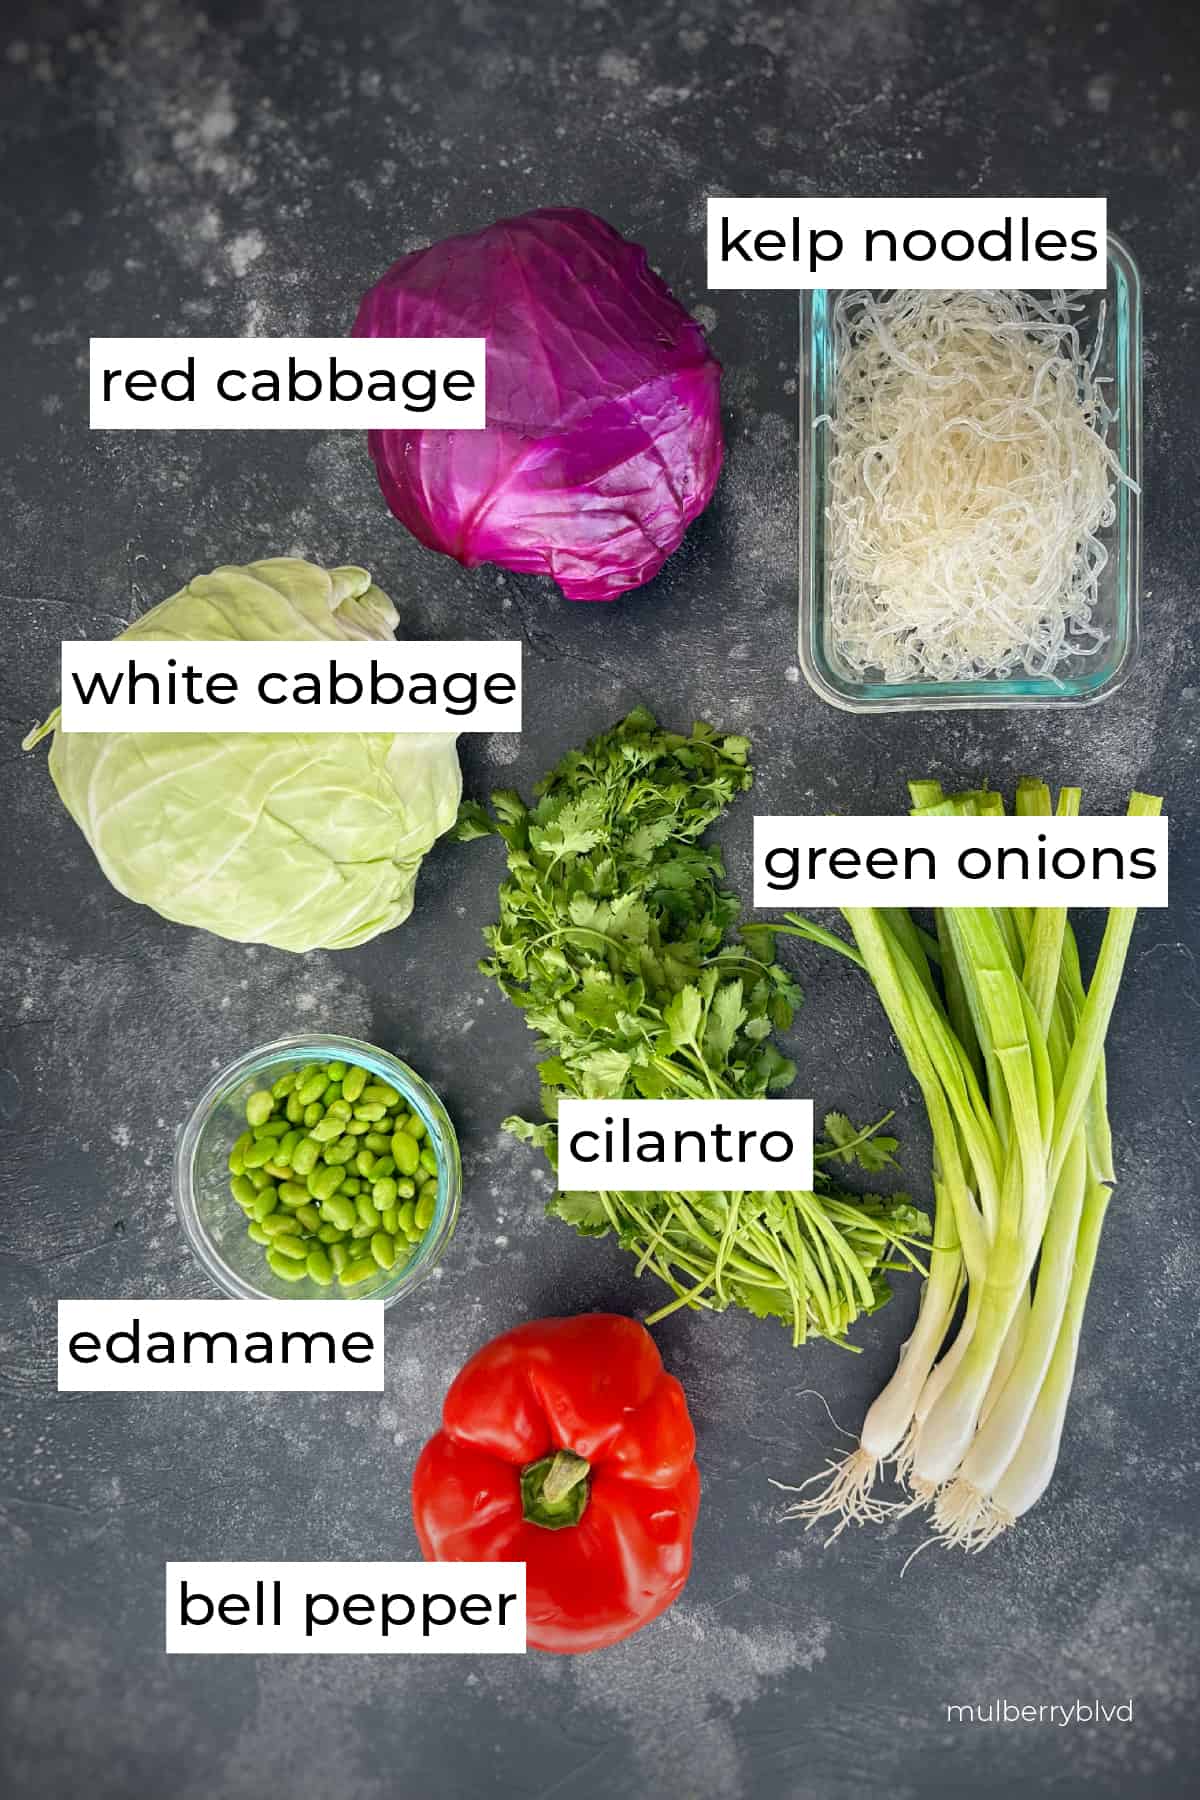 Ingredients, red cabbage, kelp noodles, white cabbage, green onion, cilantro, edamame, bell pepper